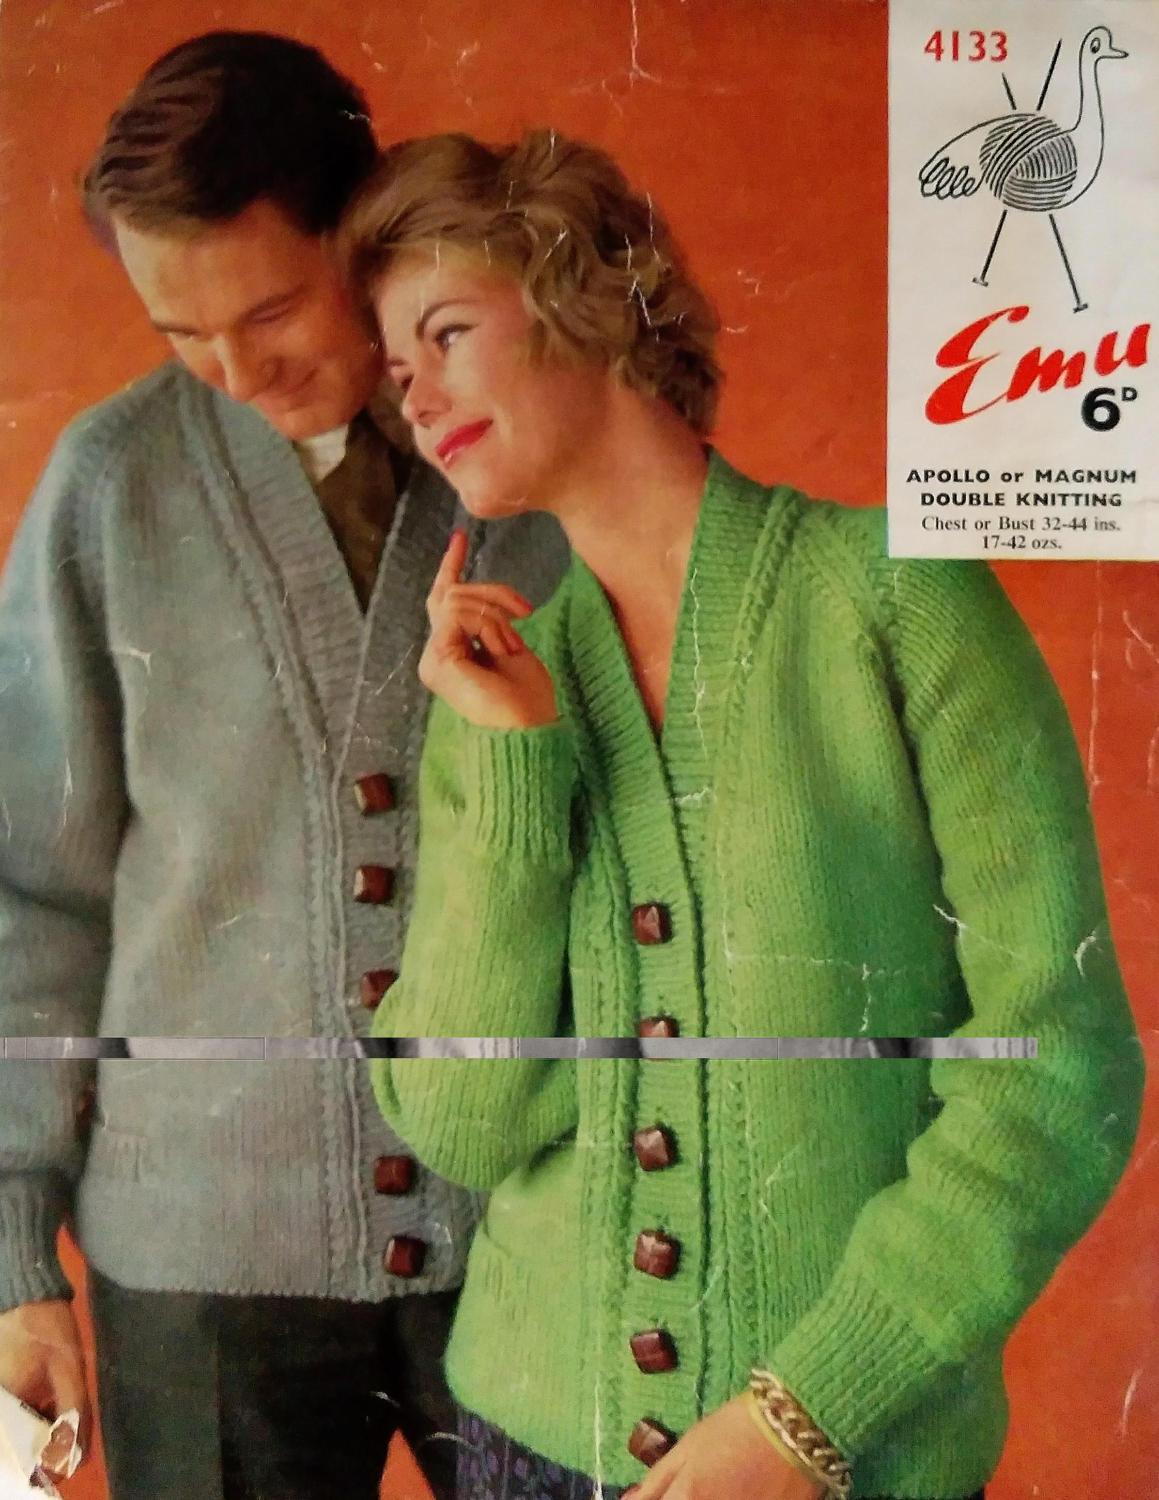 Knitted Coat Patterns Emu His Hers Knitted Jackets Vintage Knitted Jackets Knitting Patterns Knitted Cardigans Collectable Knitting Knitting Vintage Knits